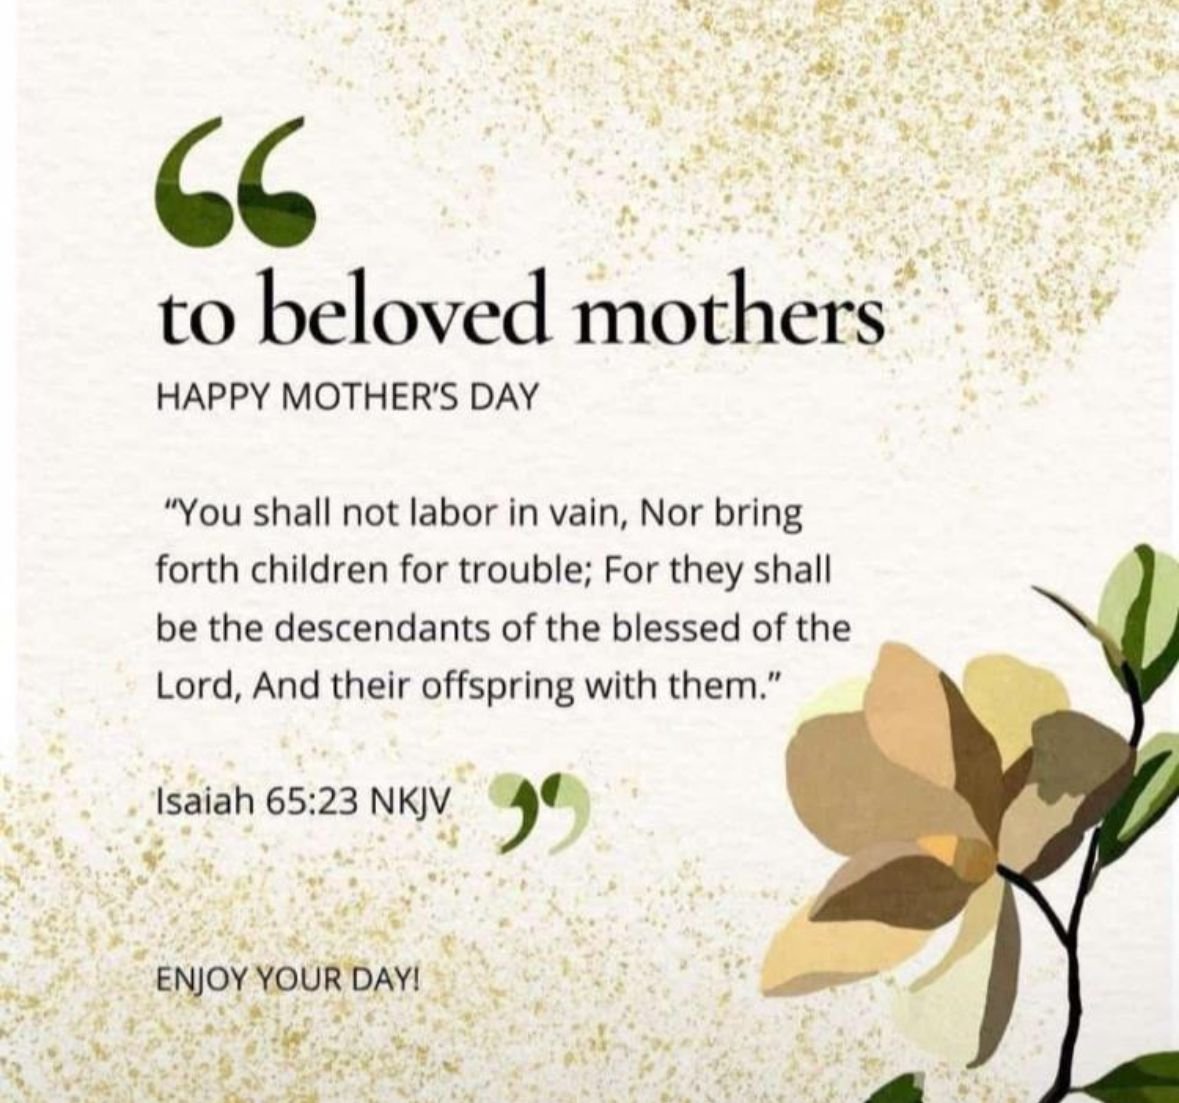 Happy Mother’s Day to all the incredible mothers out there! Your strength, love, and wisdom shape our homes, communities, and nations. Today, we celebrate you and the profound impact you have every day. Evermore thanks.